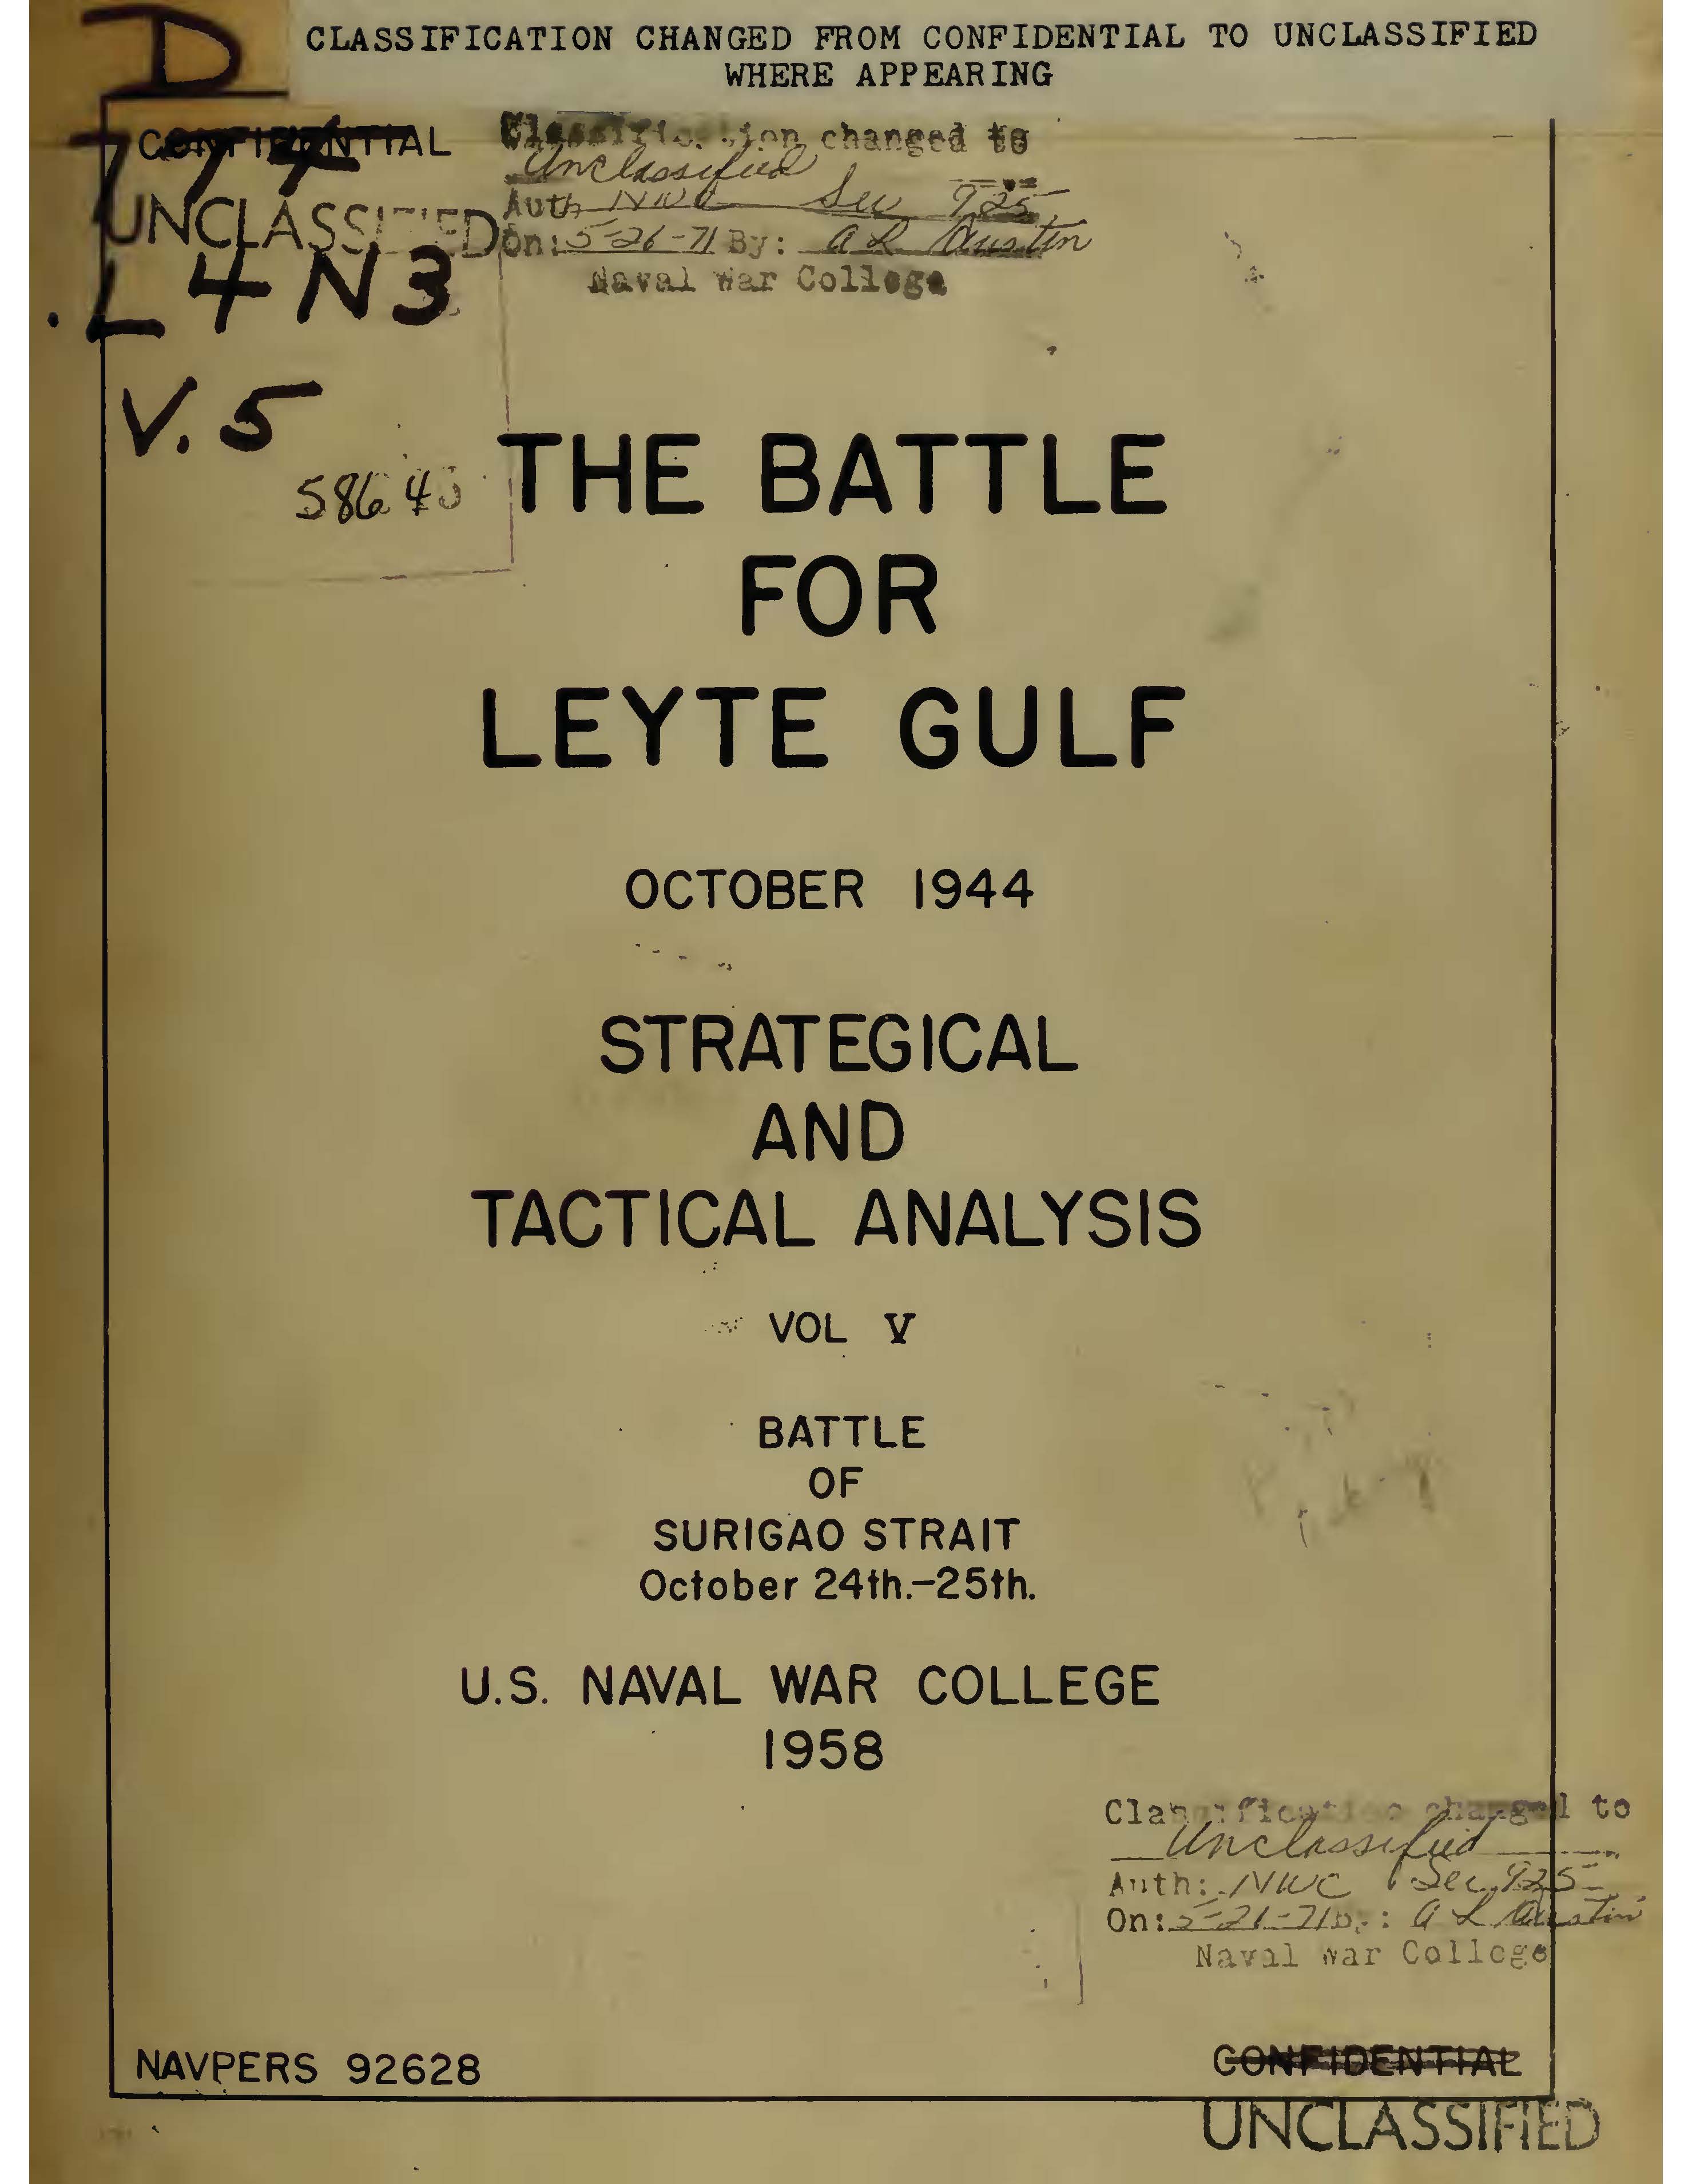 Battle for Leyte Gulf, October 1944: Strategical and Tactical Analysis. Volume V, 1958